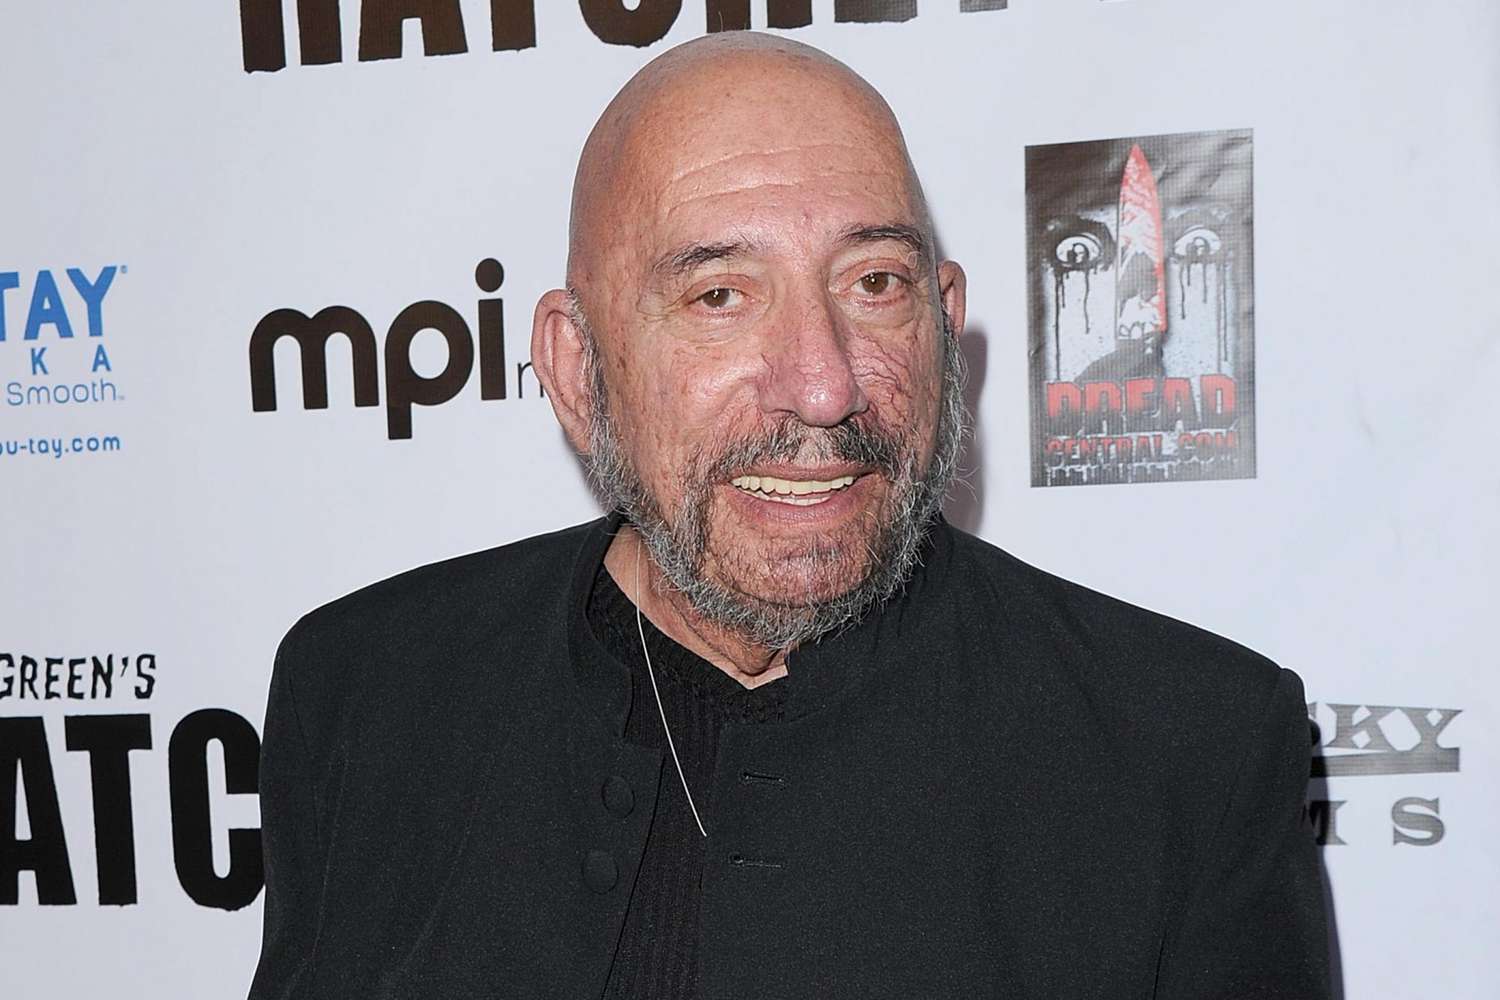 24-captivating-facts-about-sid-haig